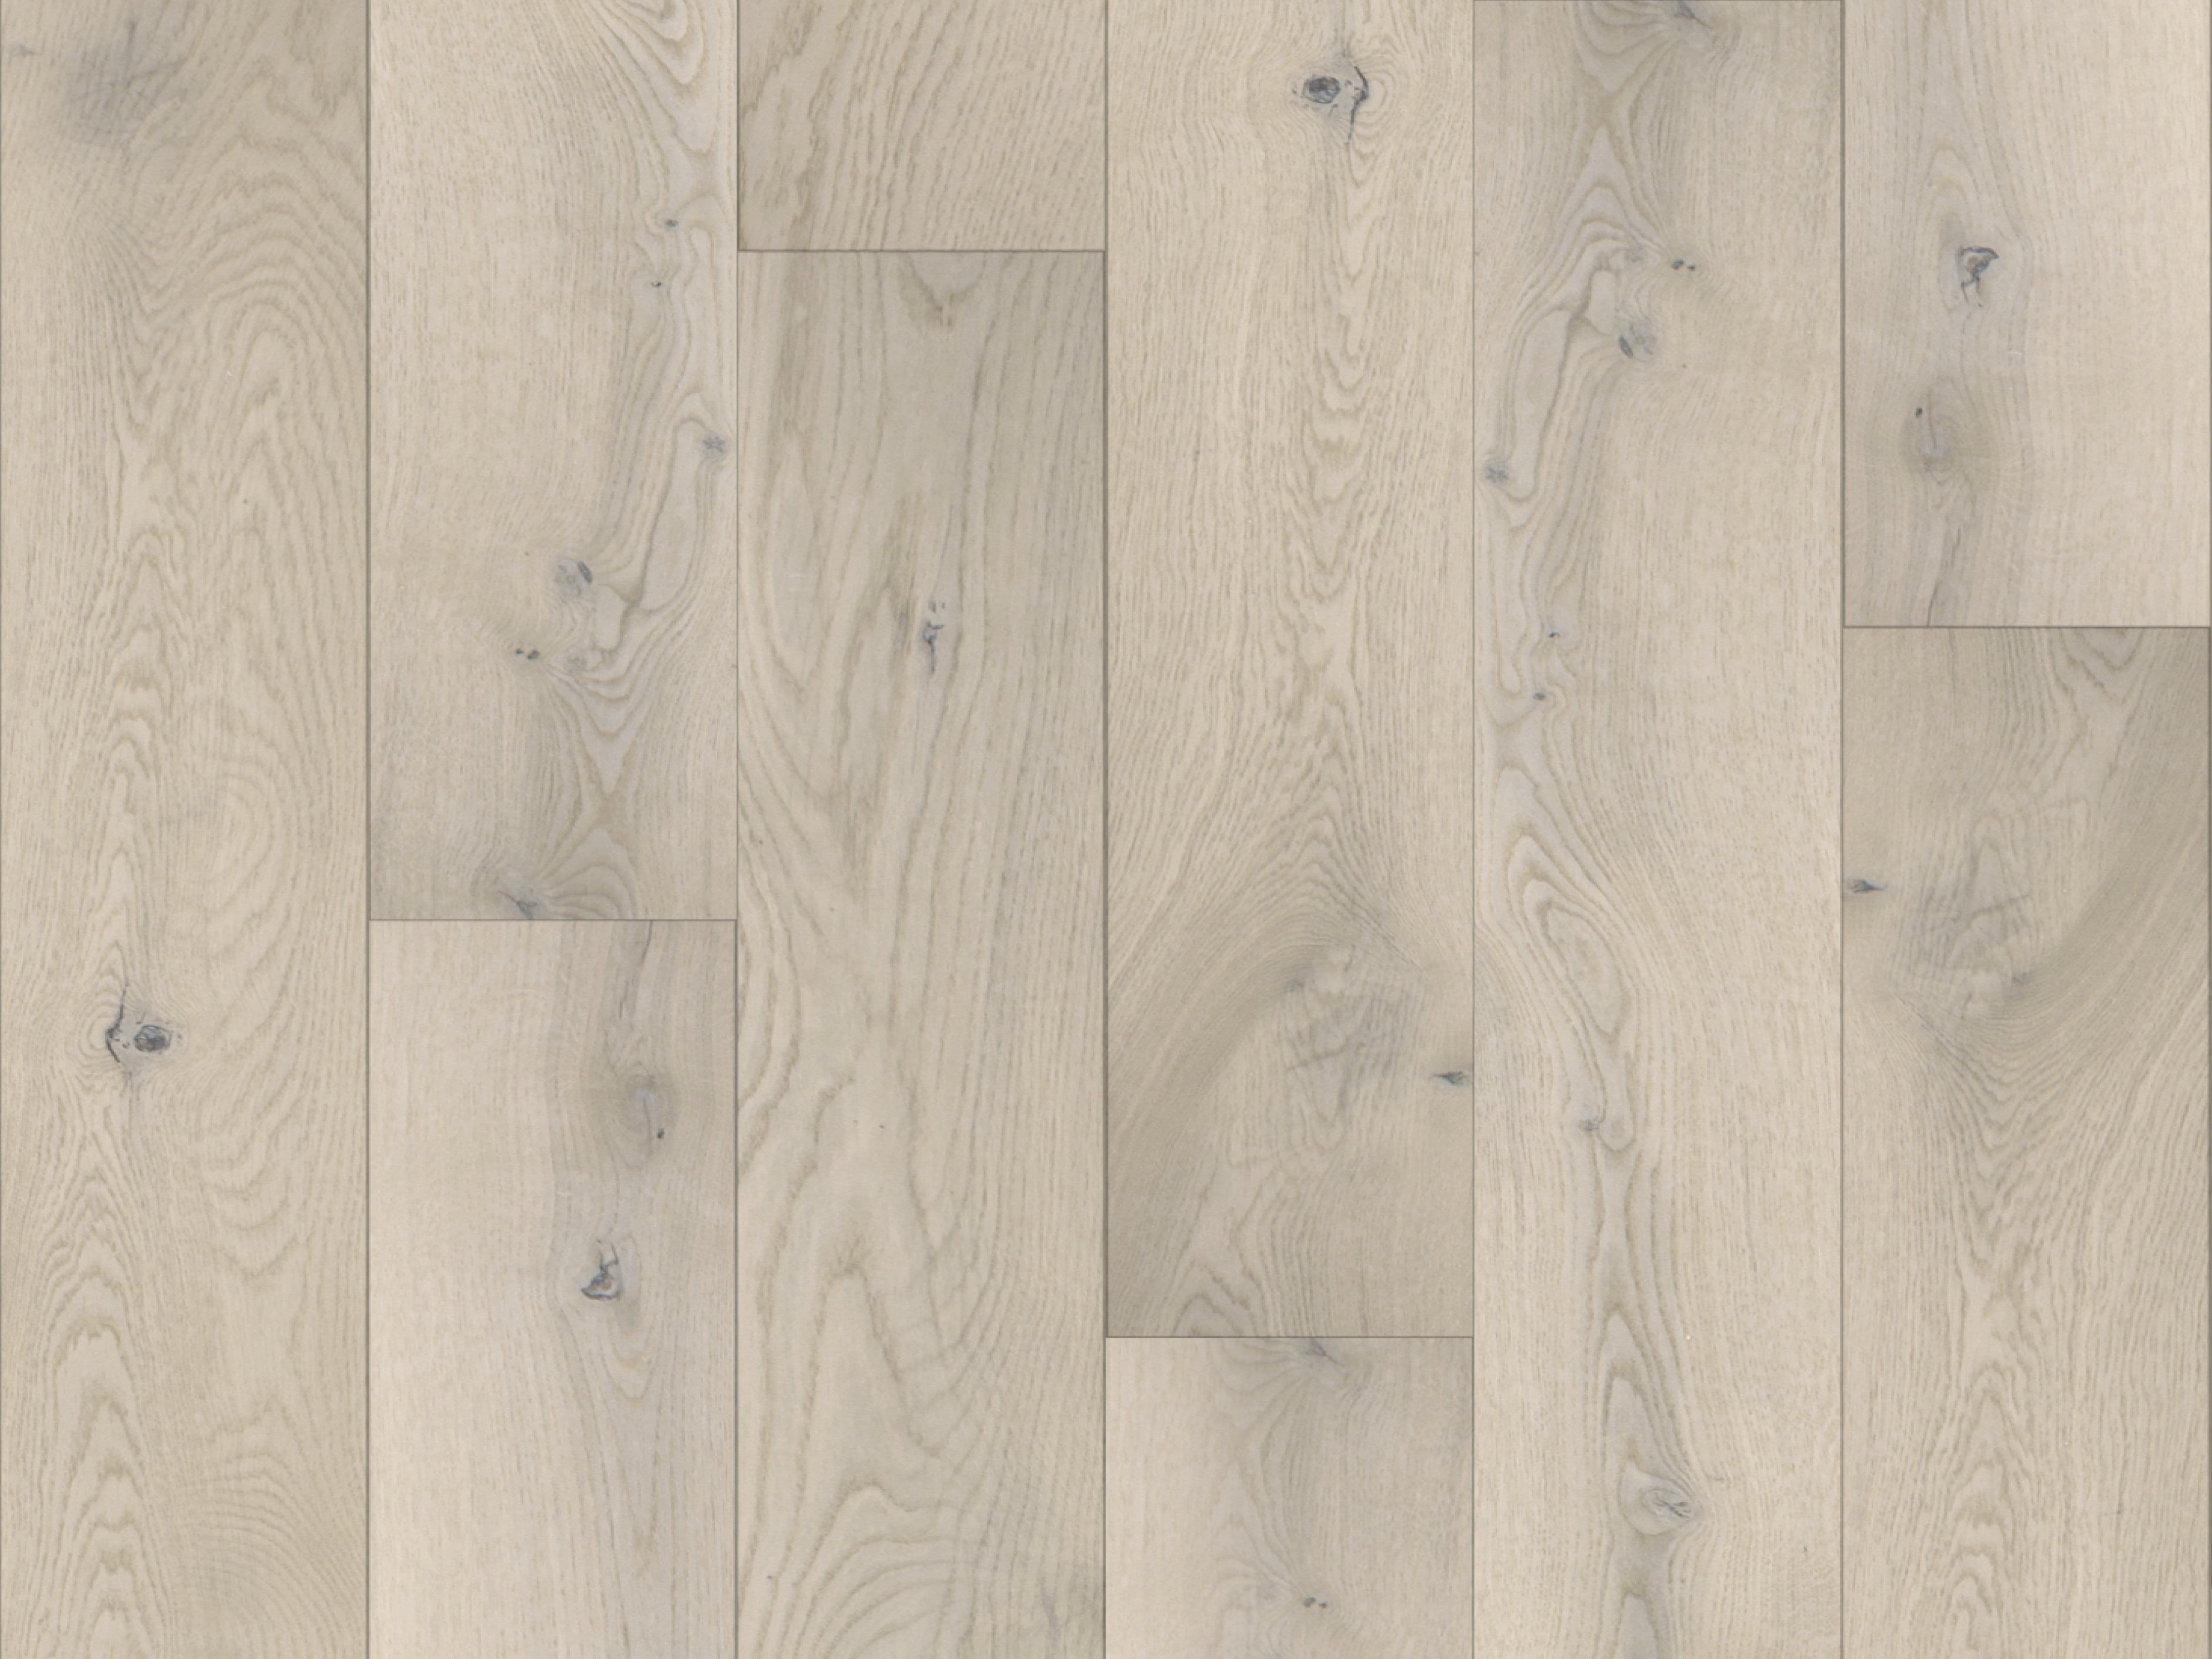 duchateau signature chateau white patina european oak engineered hardnatural wood floor uv oil finish for interior use distributed by surface group international